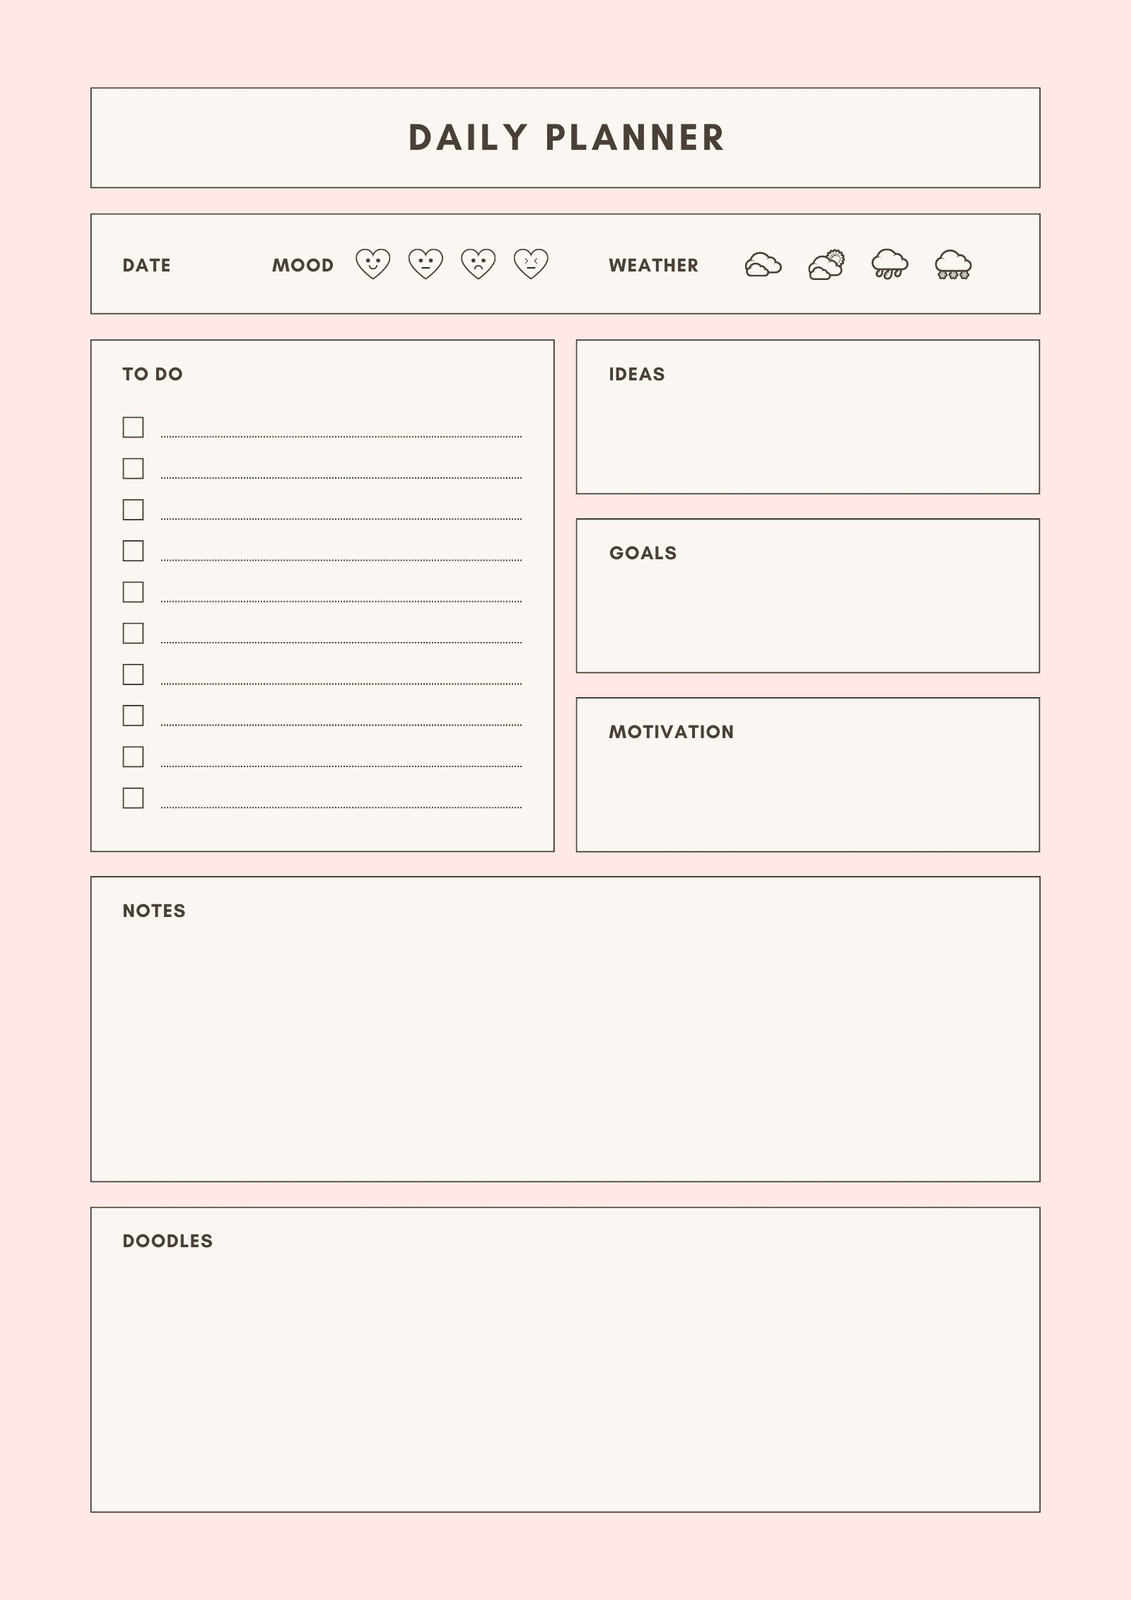 Page 3 - Free daily planner templates to customize | Canva